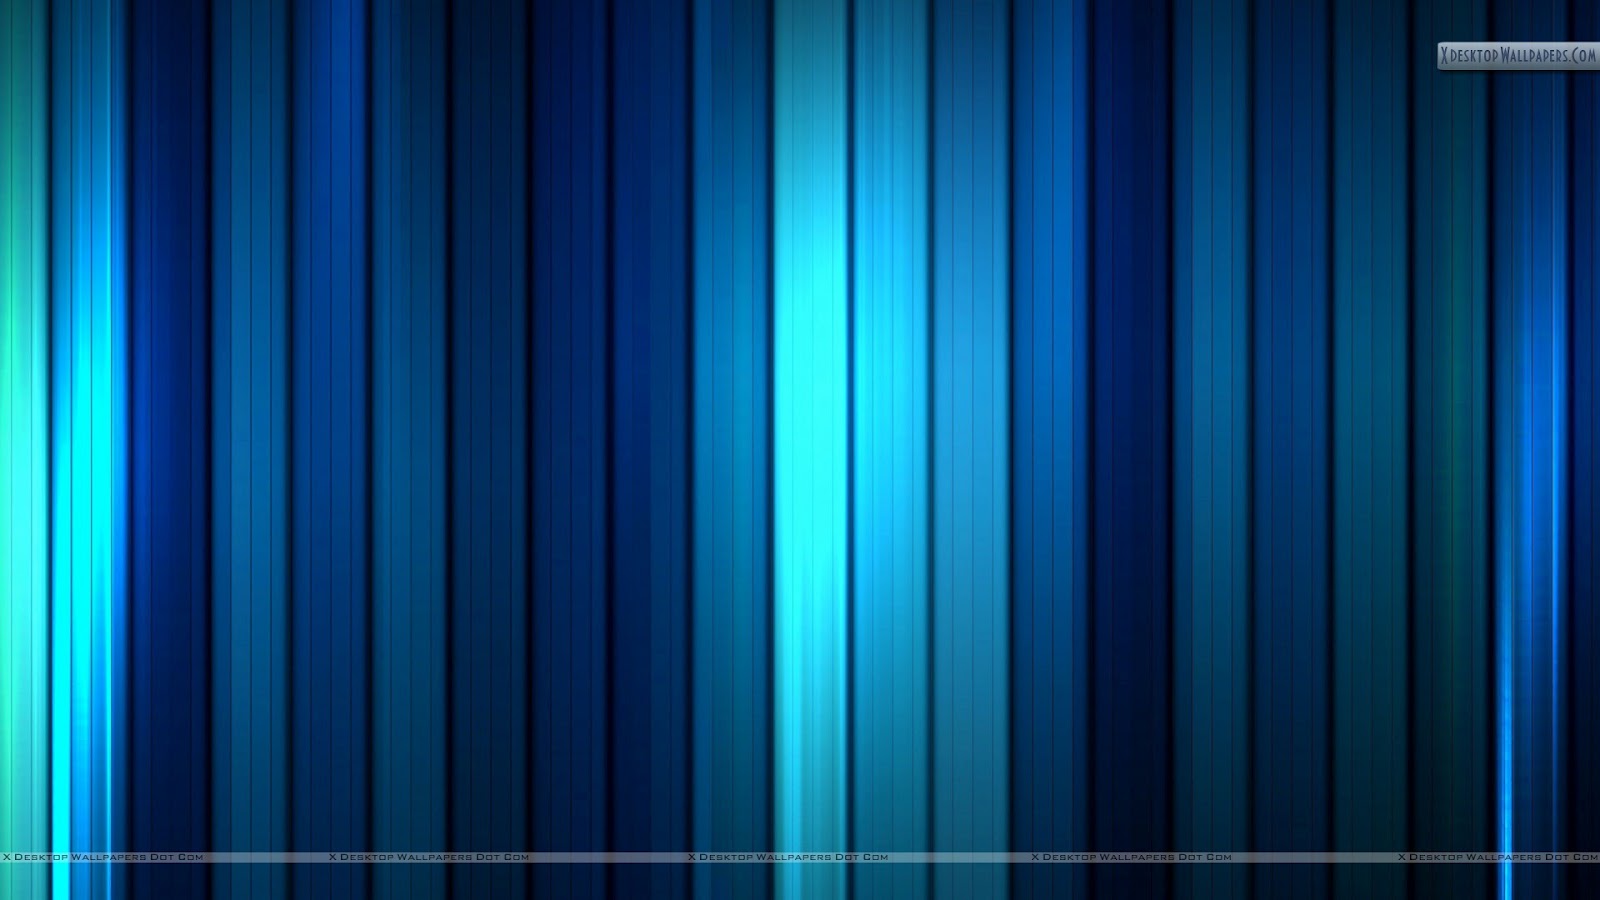 The Only Wallpapers: cool blue wallpaper backgrounds